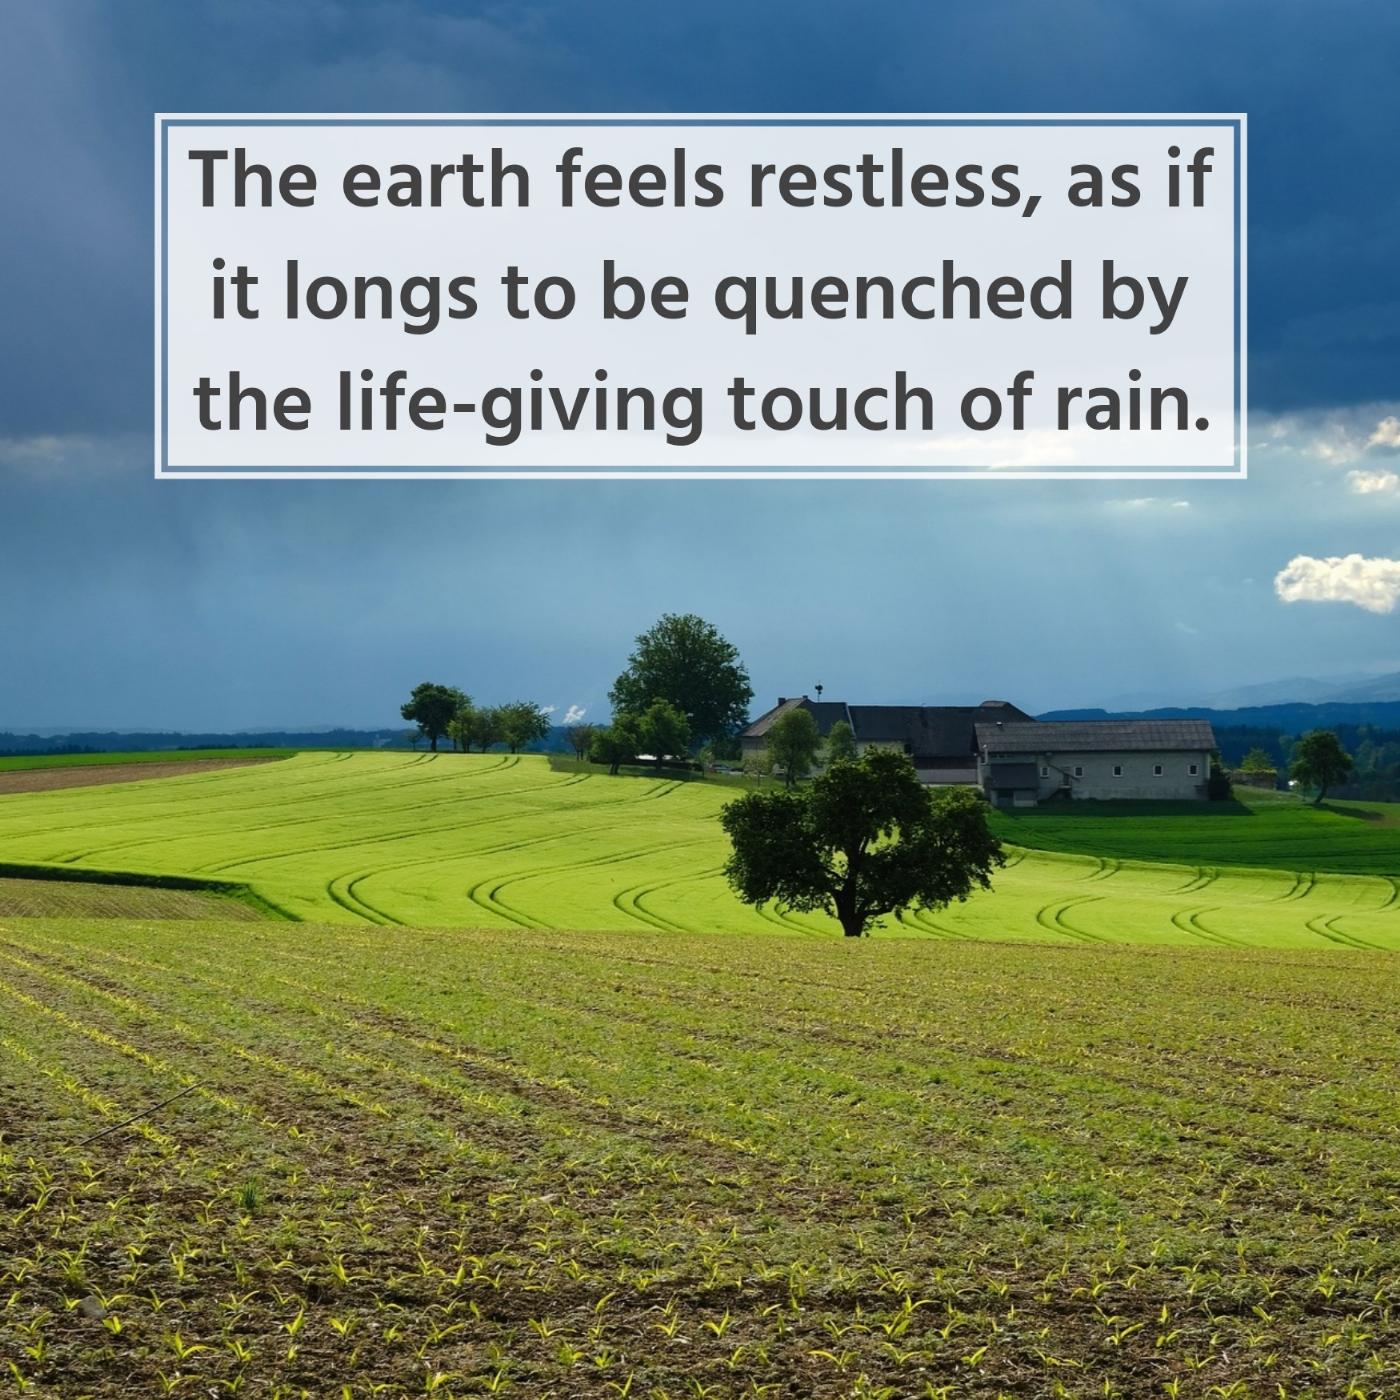 The earth feels restless as if it longs to be quenched